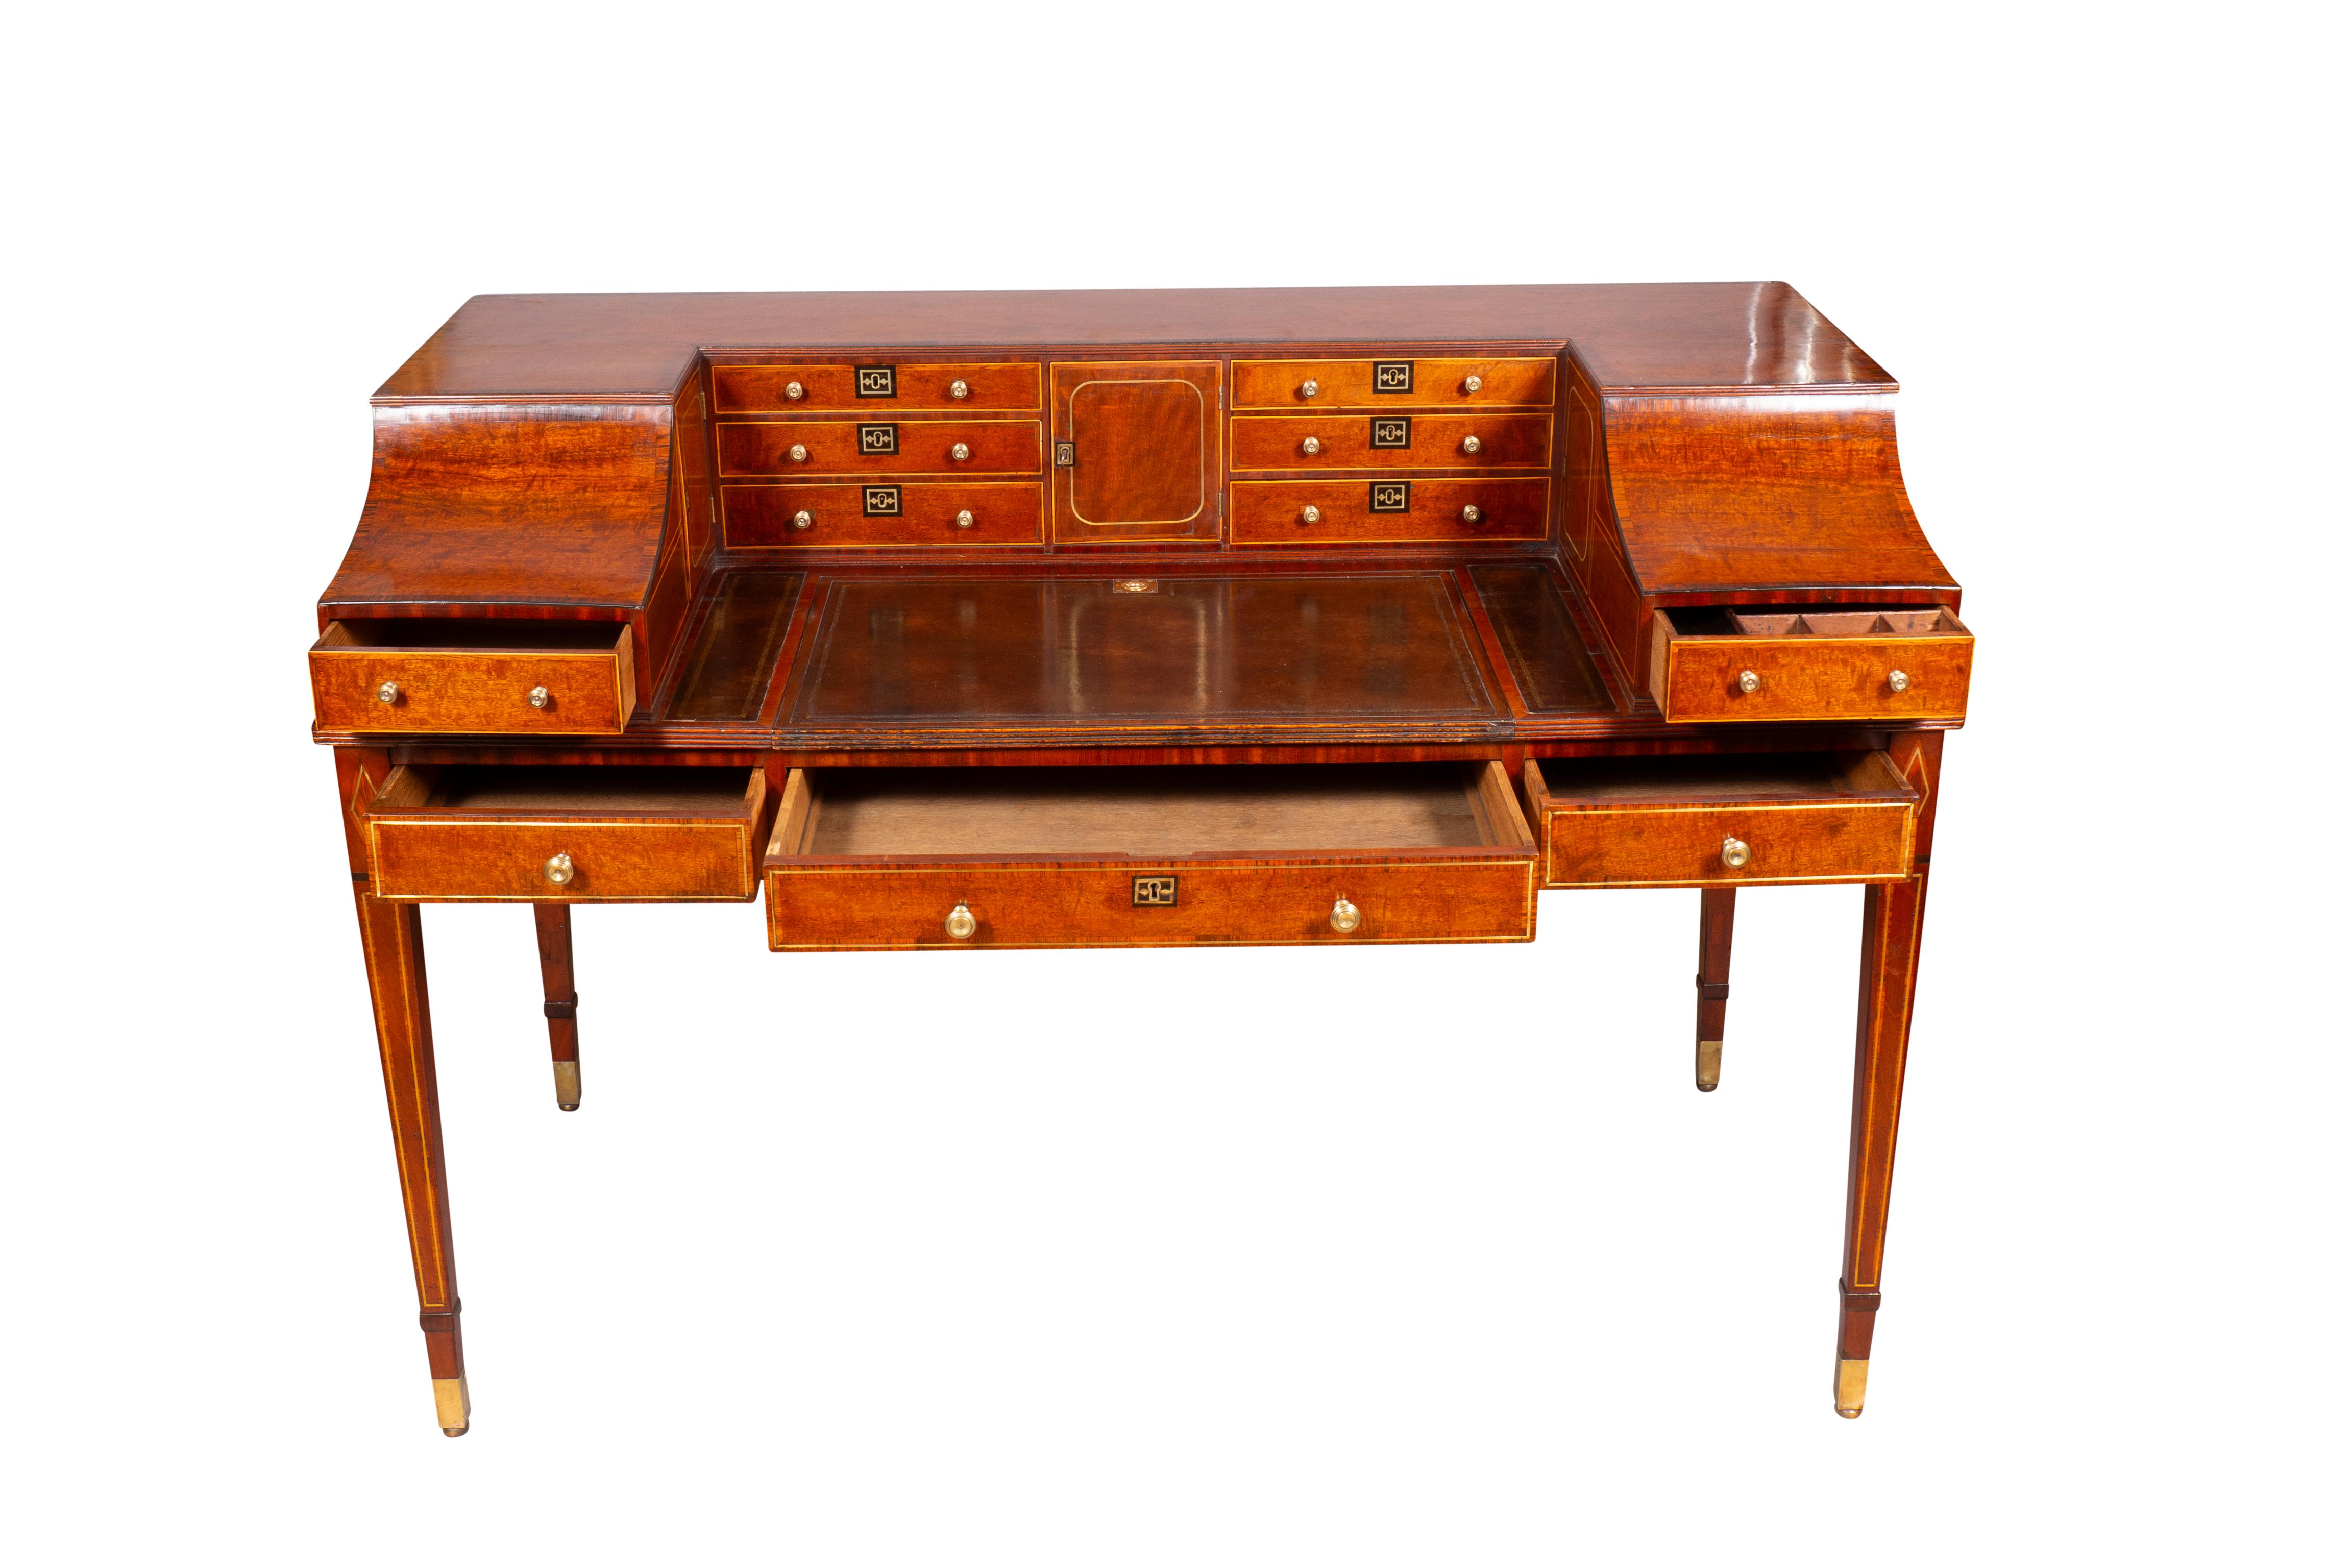 George III Style Mahogany And Brass Inlaid Carleton House Desk In Good Condition For Sale In Essex, MA